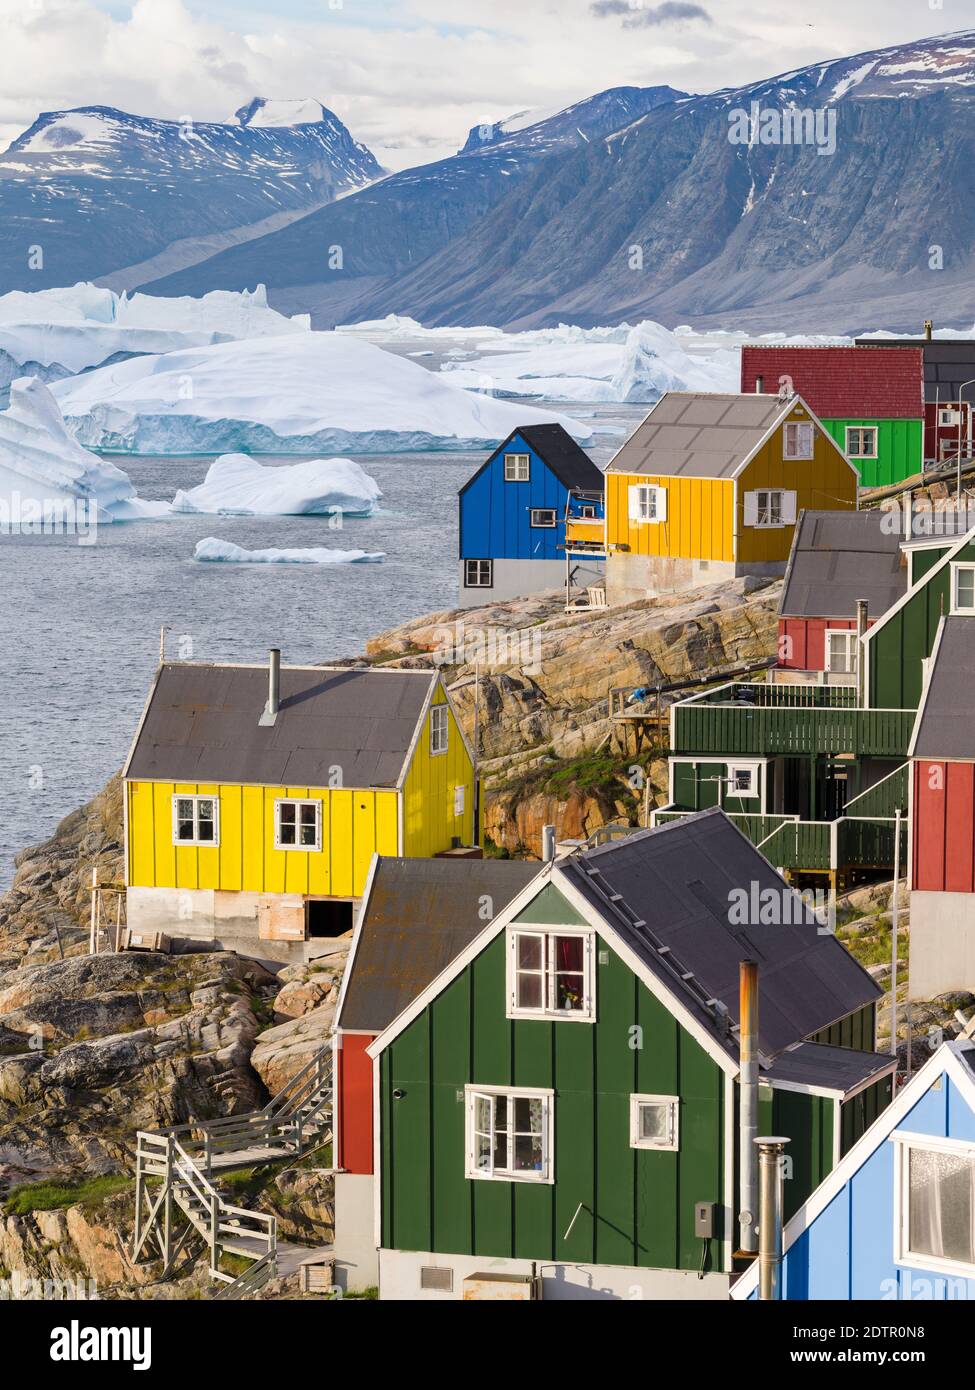 The town Uummannaq in the north of West Greenland, located on an island  in the Uummannaq Fjord System, in background the Nuussuaq (Nugssuaq) Peninsul Stock Photo